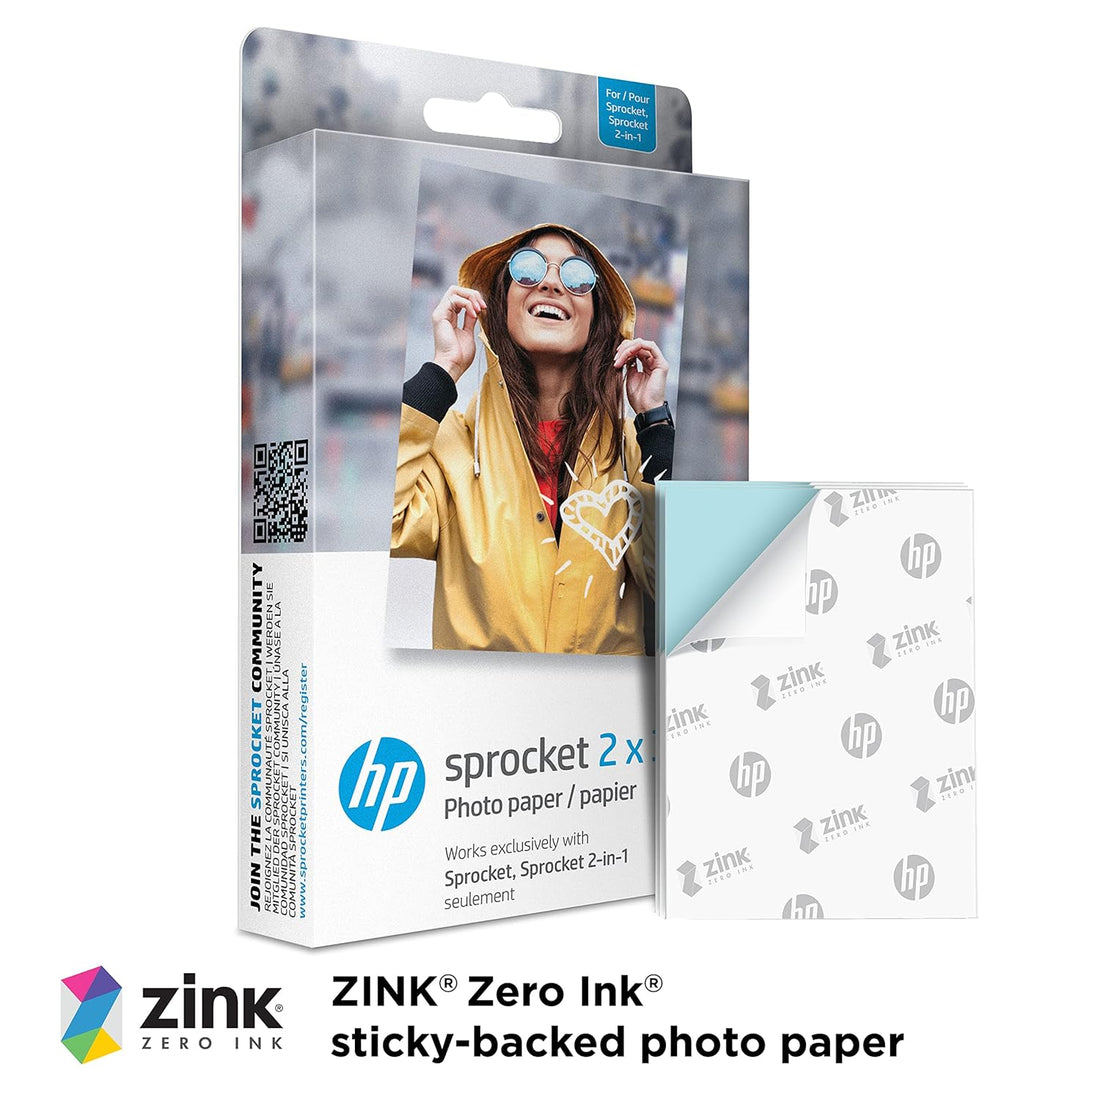 HP Sprocket Photo Paper for Sprocket Portable Photo Printer, (2x3-inch), Sticky-Backed 50 sheets